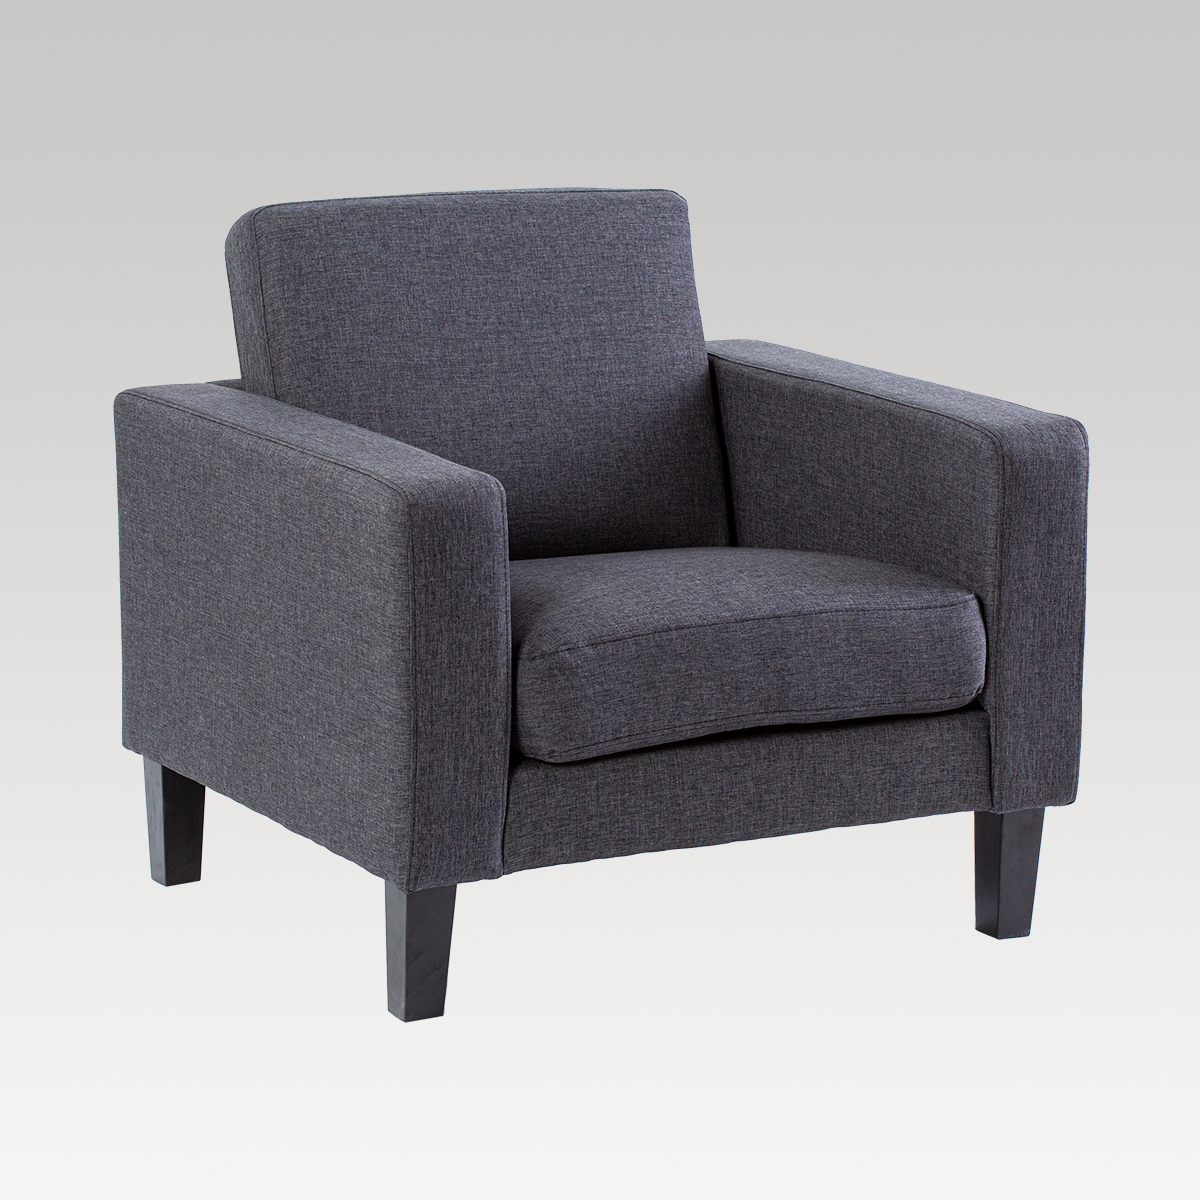 Image of Makers Fenix Fabric Single Seater Chair - Charcoal